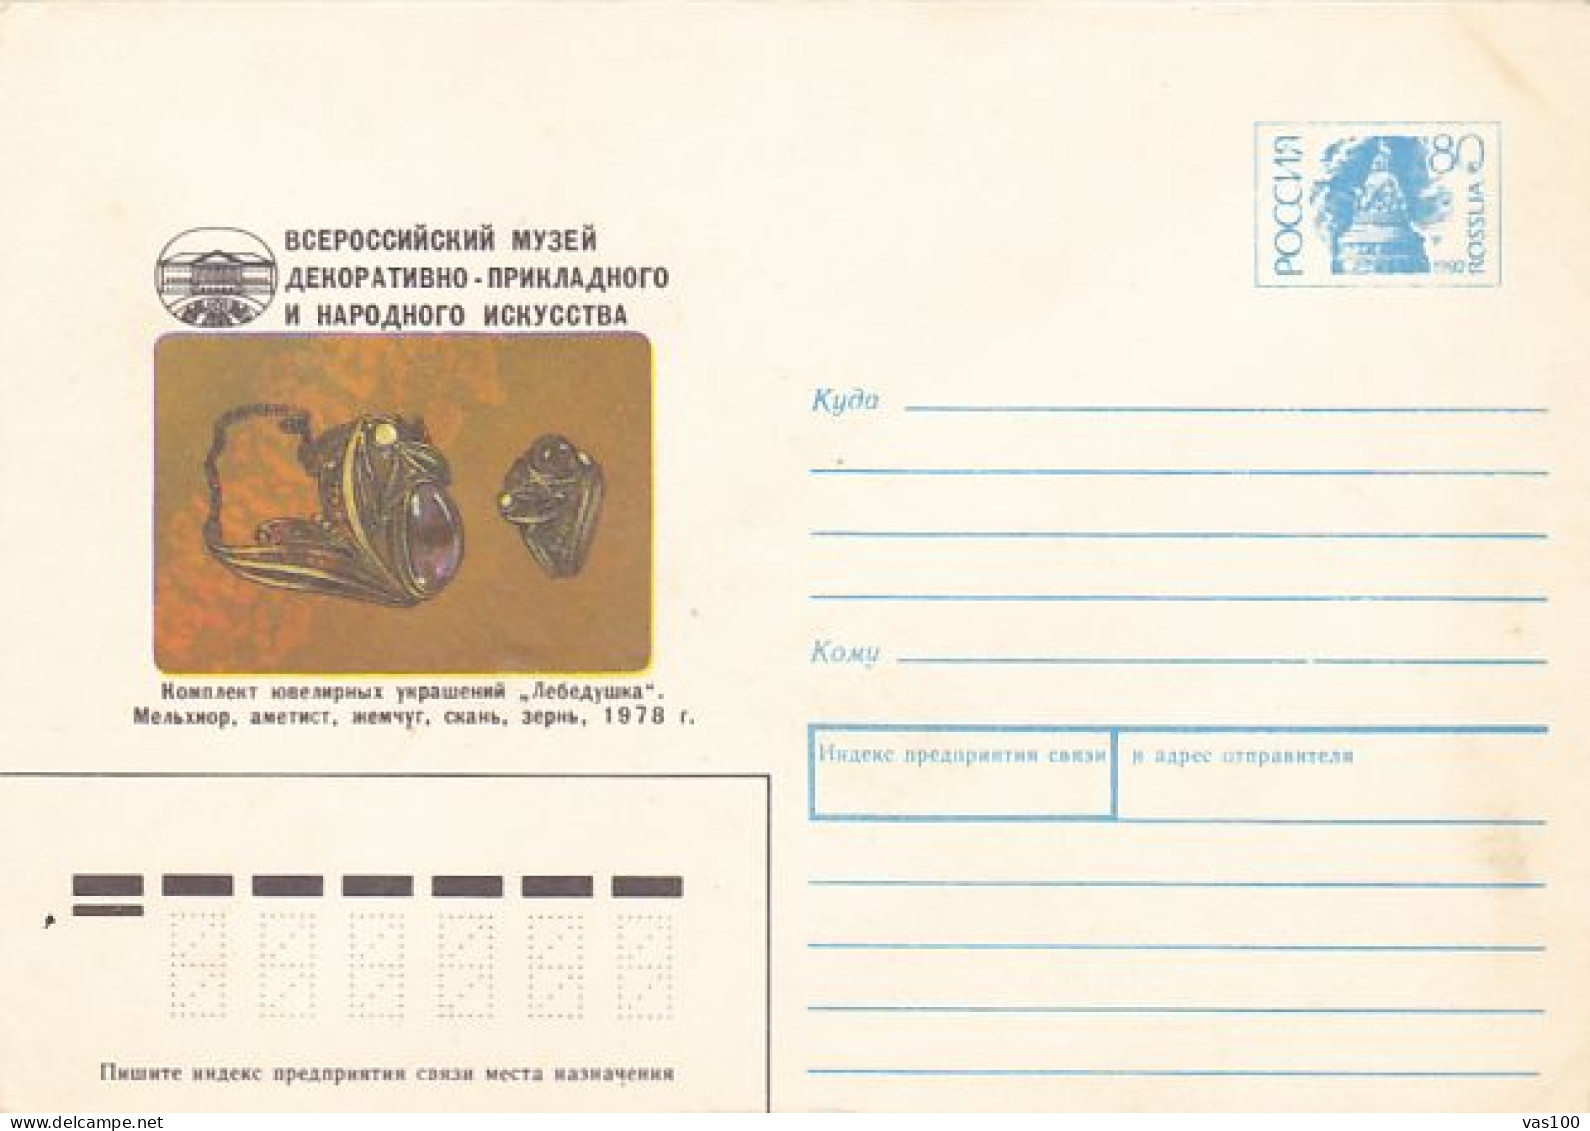 MOSCOW MUSEUM, JEWELRIES, COVER STATIONERY, ENTIER POSTAL, 1992, RUSSIA - Stamped Stationery